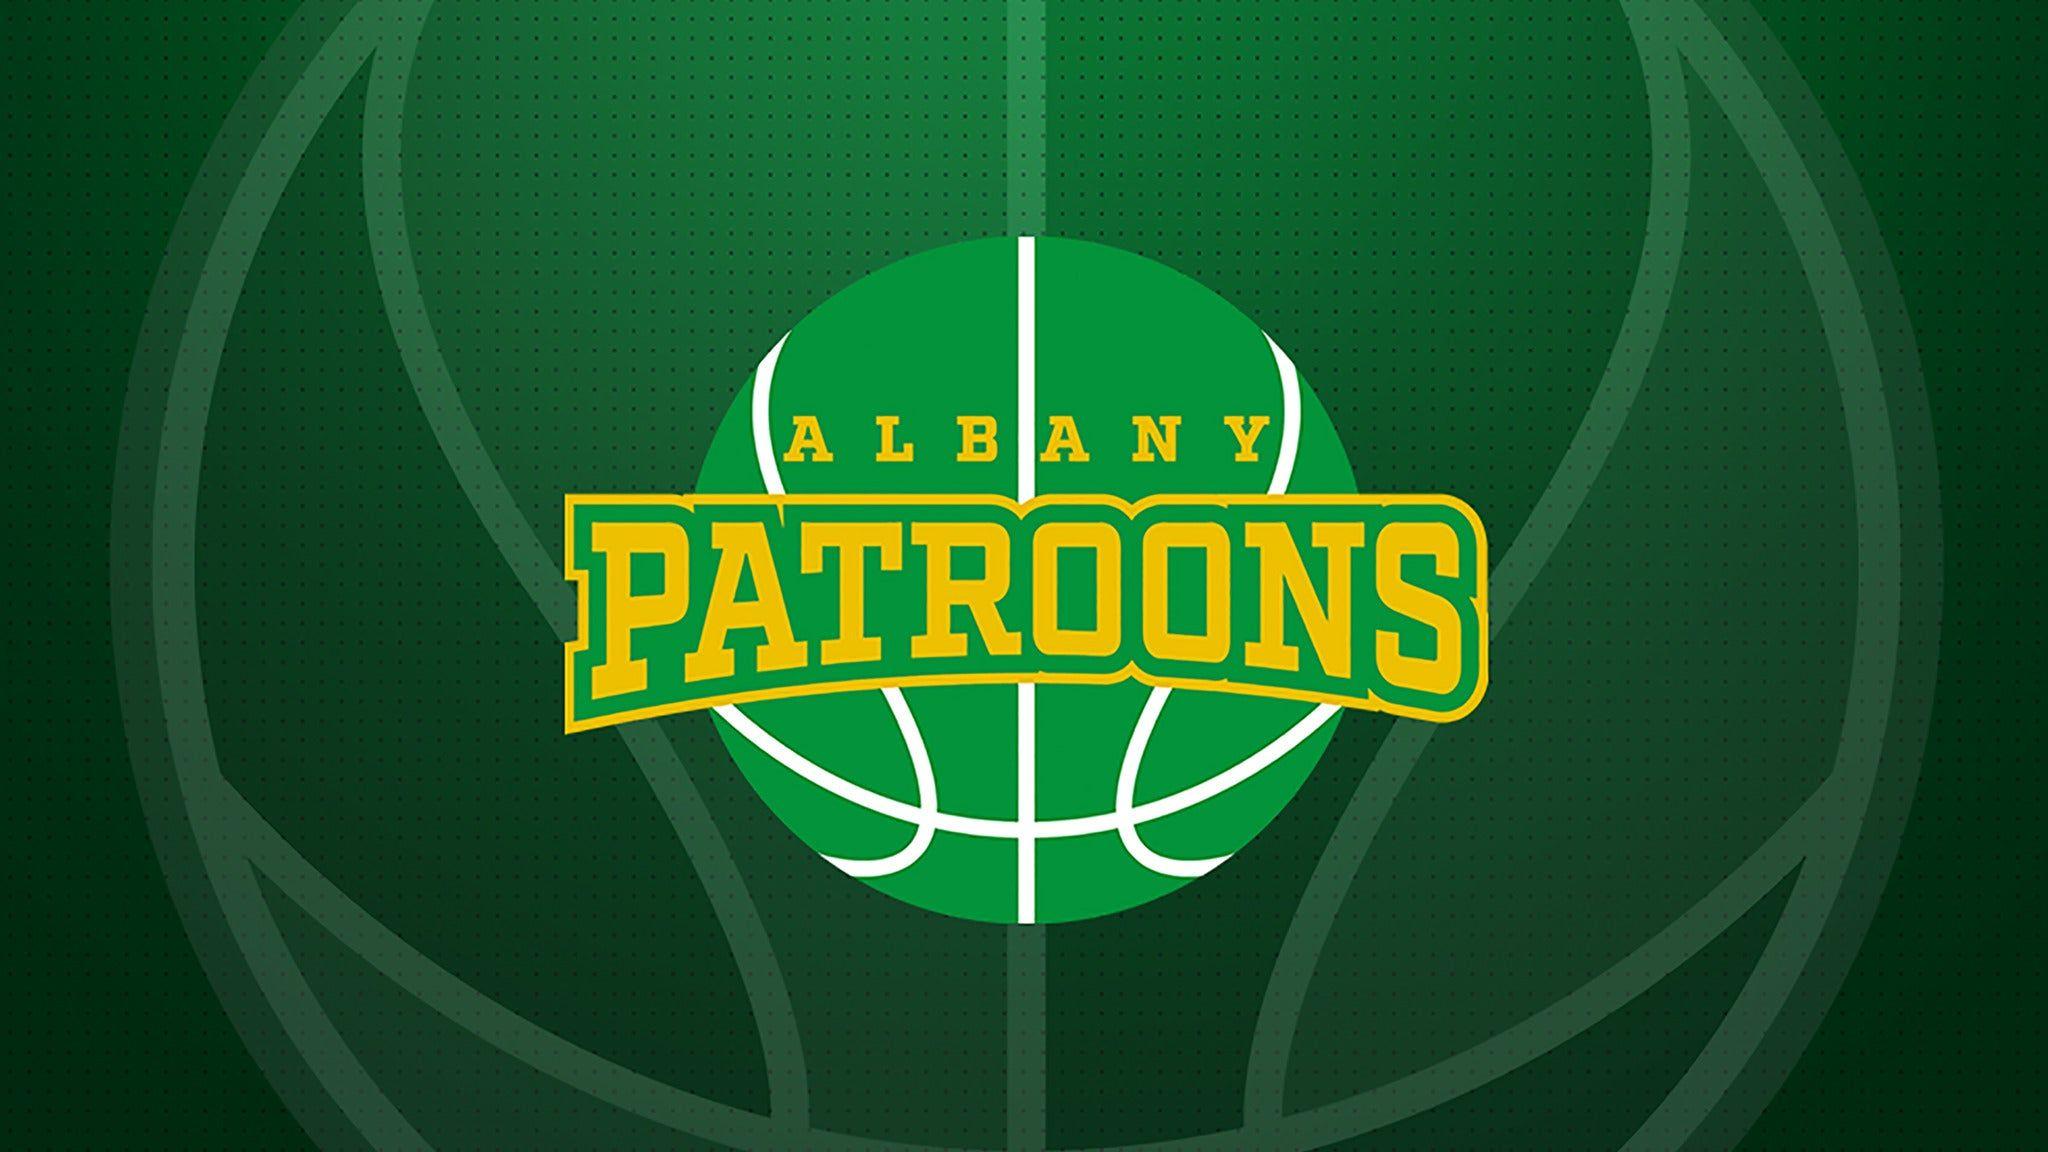 Albany Patroons vs Connecticut Crusaders